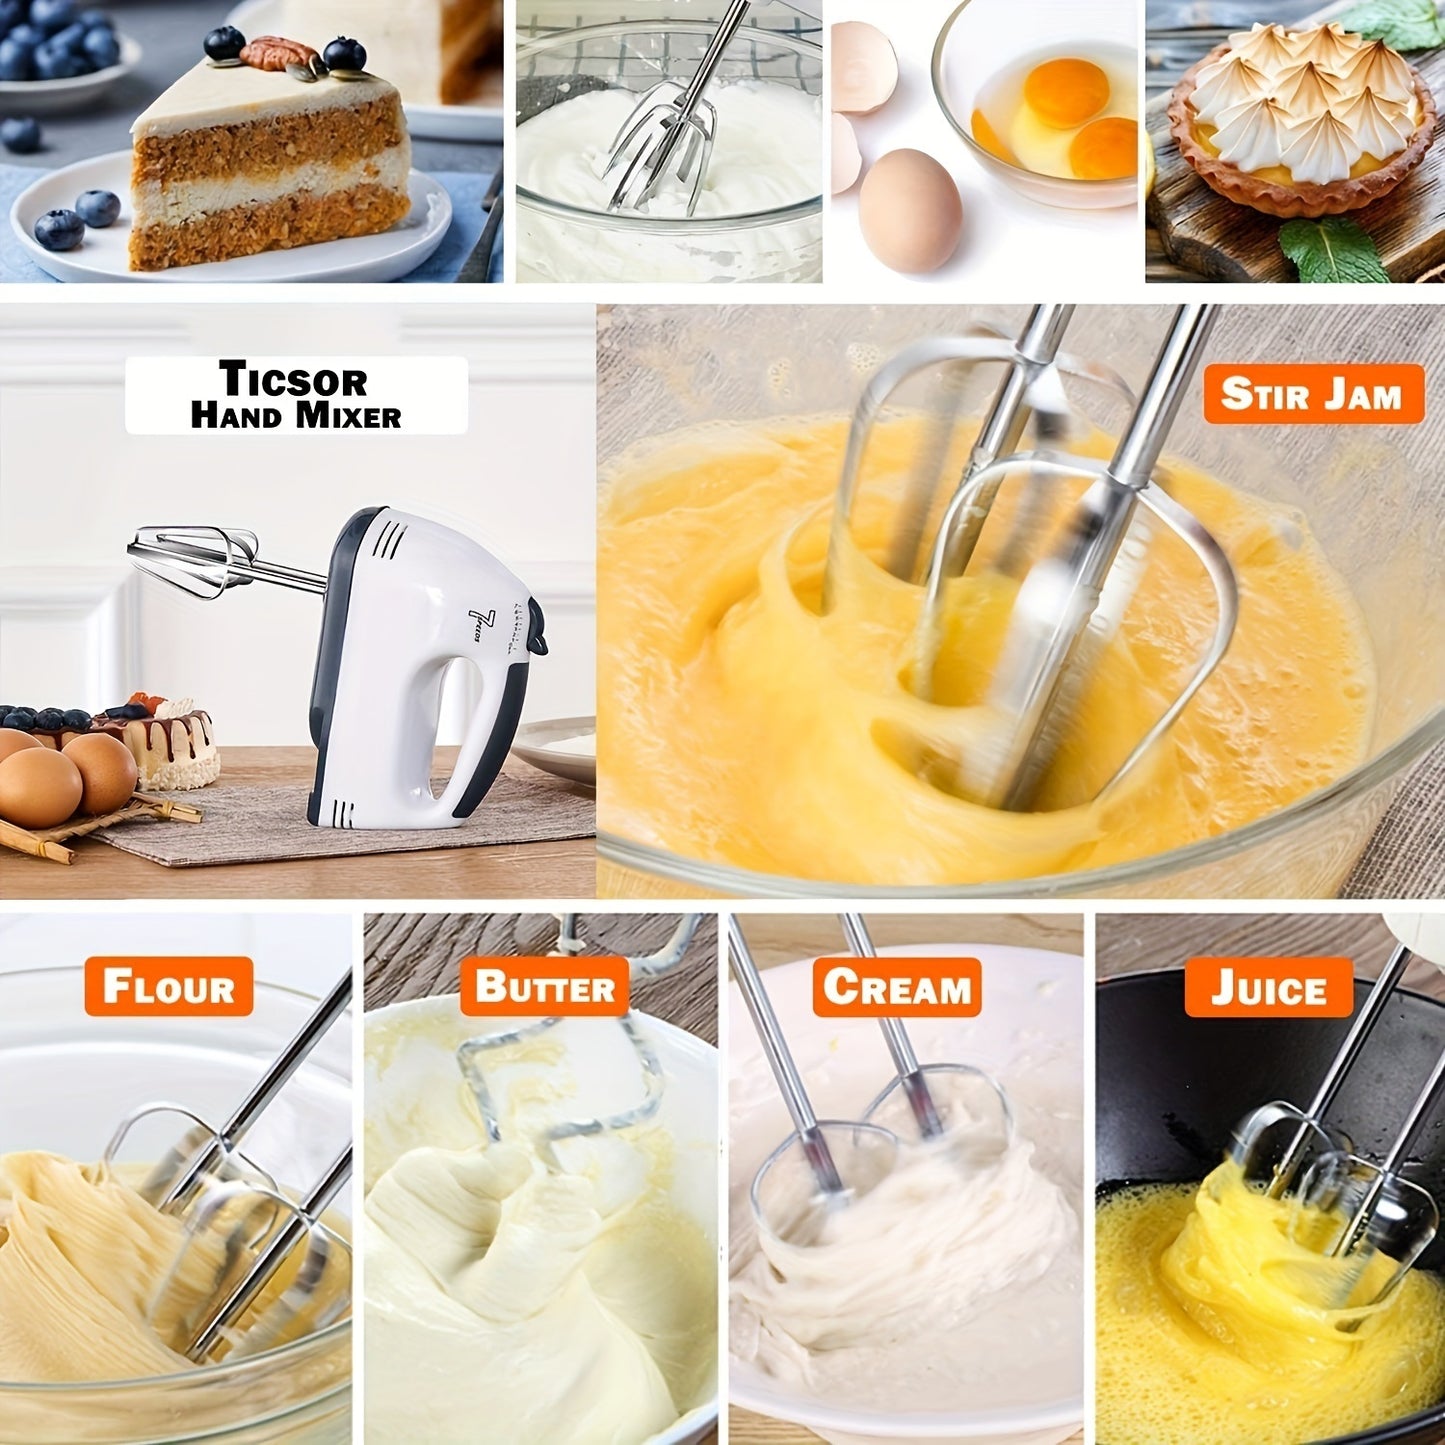 1pc 7 Speeds Electric Hand Mixer; Household Portable Powerful Handheld Electric Mixer; Hand-held Egg Beater; Small Whipping Cream Mixer For Cake; Baking; Cooking; Dessert